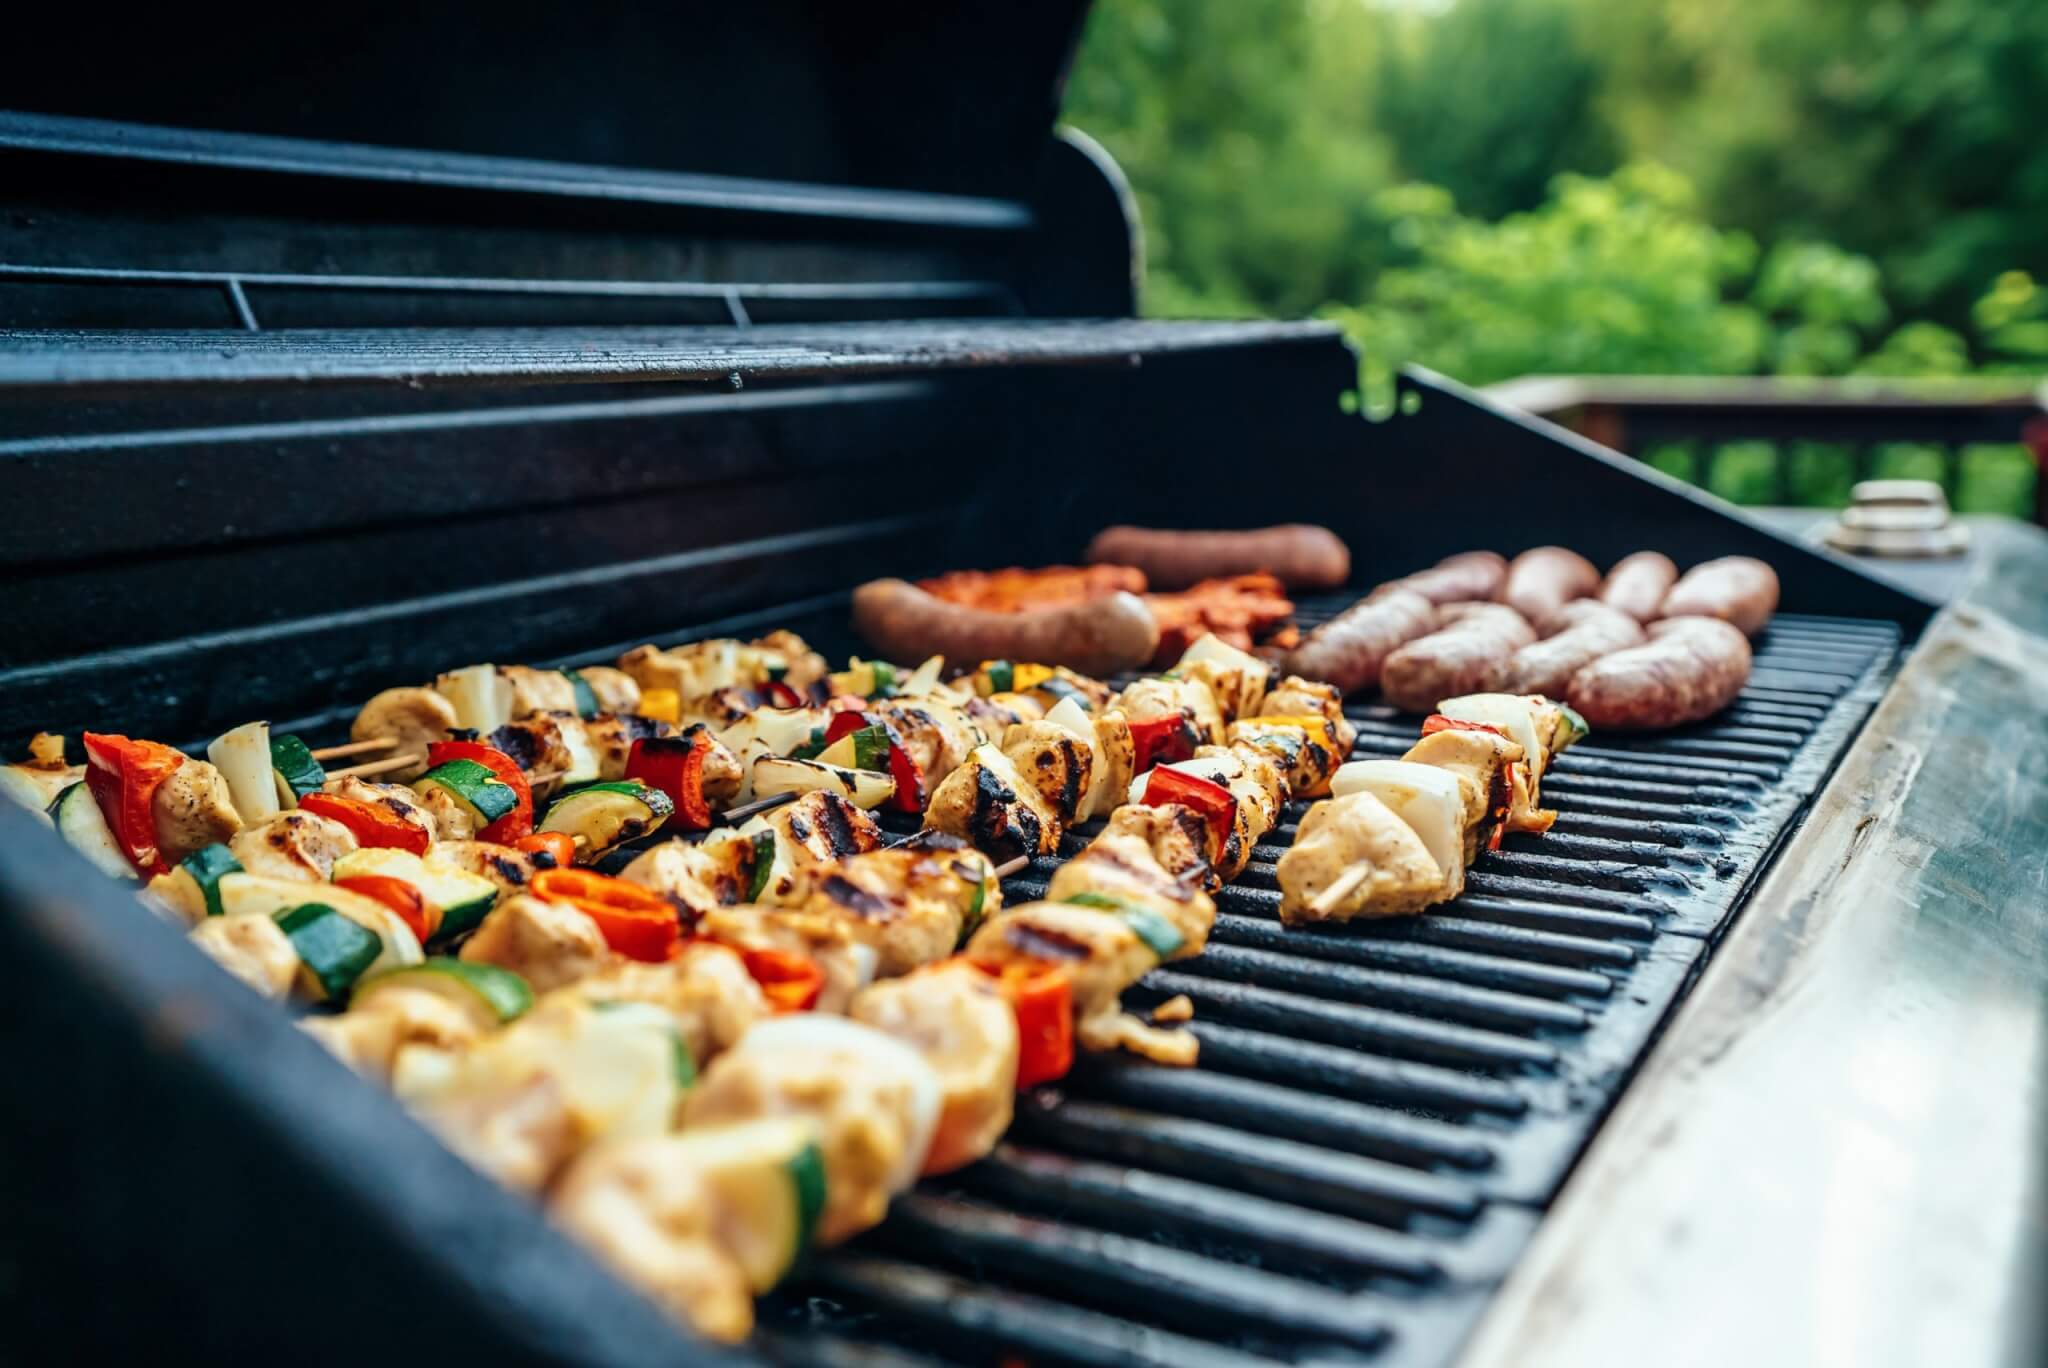 Best Gas Grills: Top 5 Barbecues Most Recommended by Experts - Study Finds